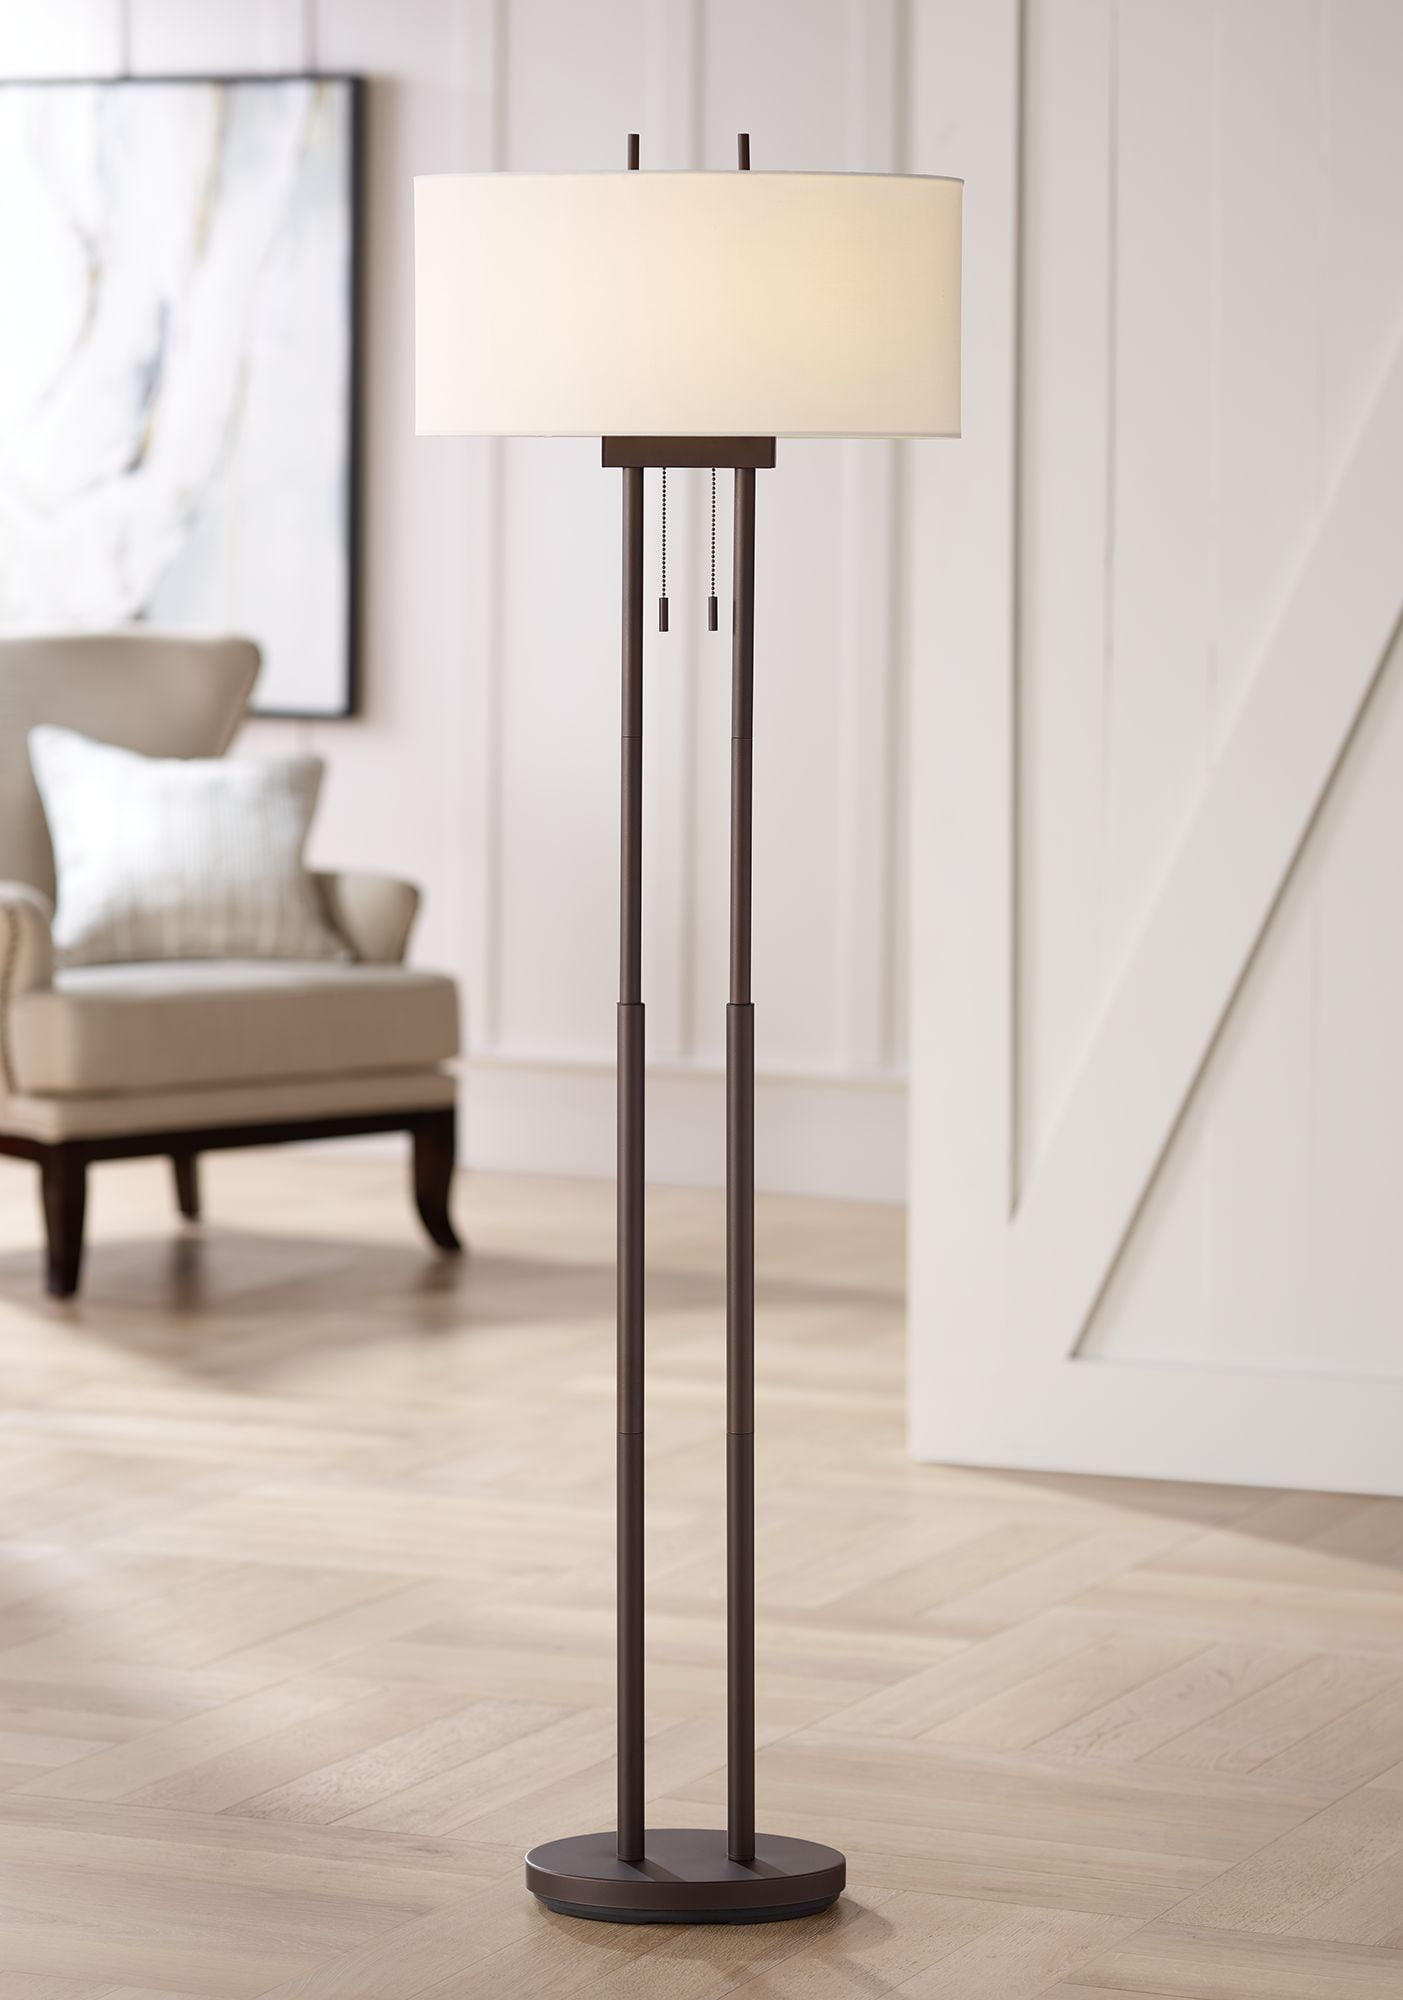 Oil Rubbed Bronze White Drum Shade, Contemporary Lamp Shades For Floor Lamps